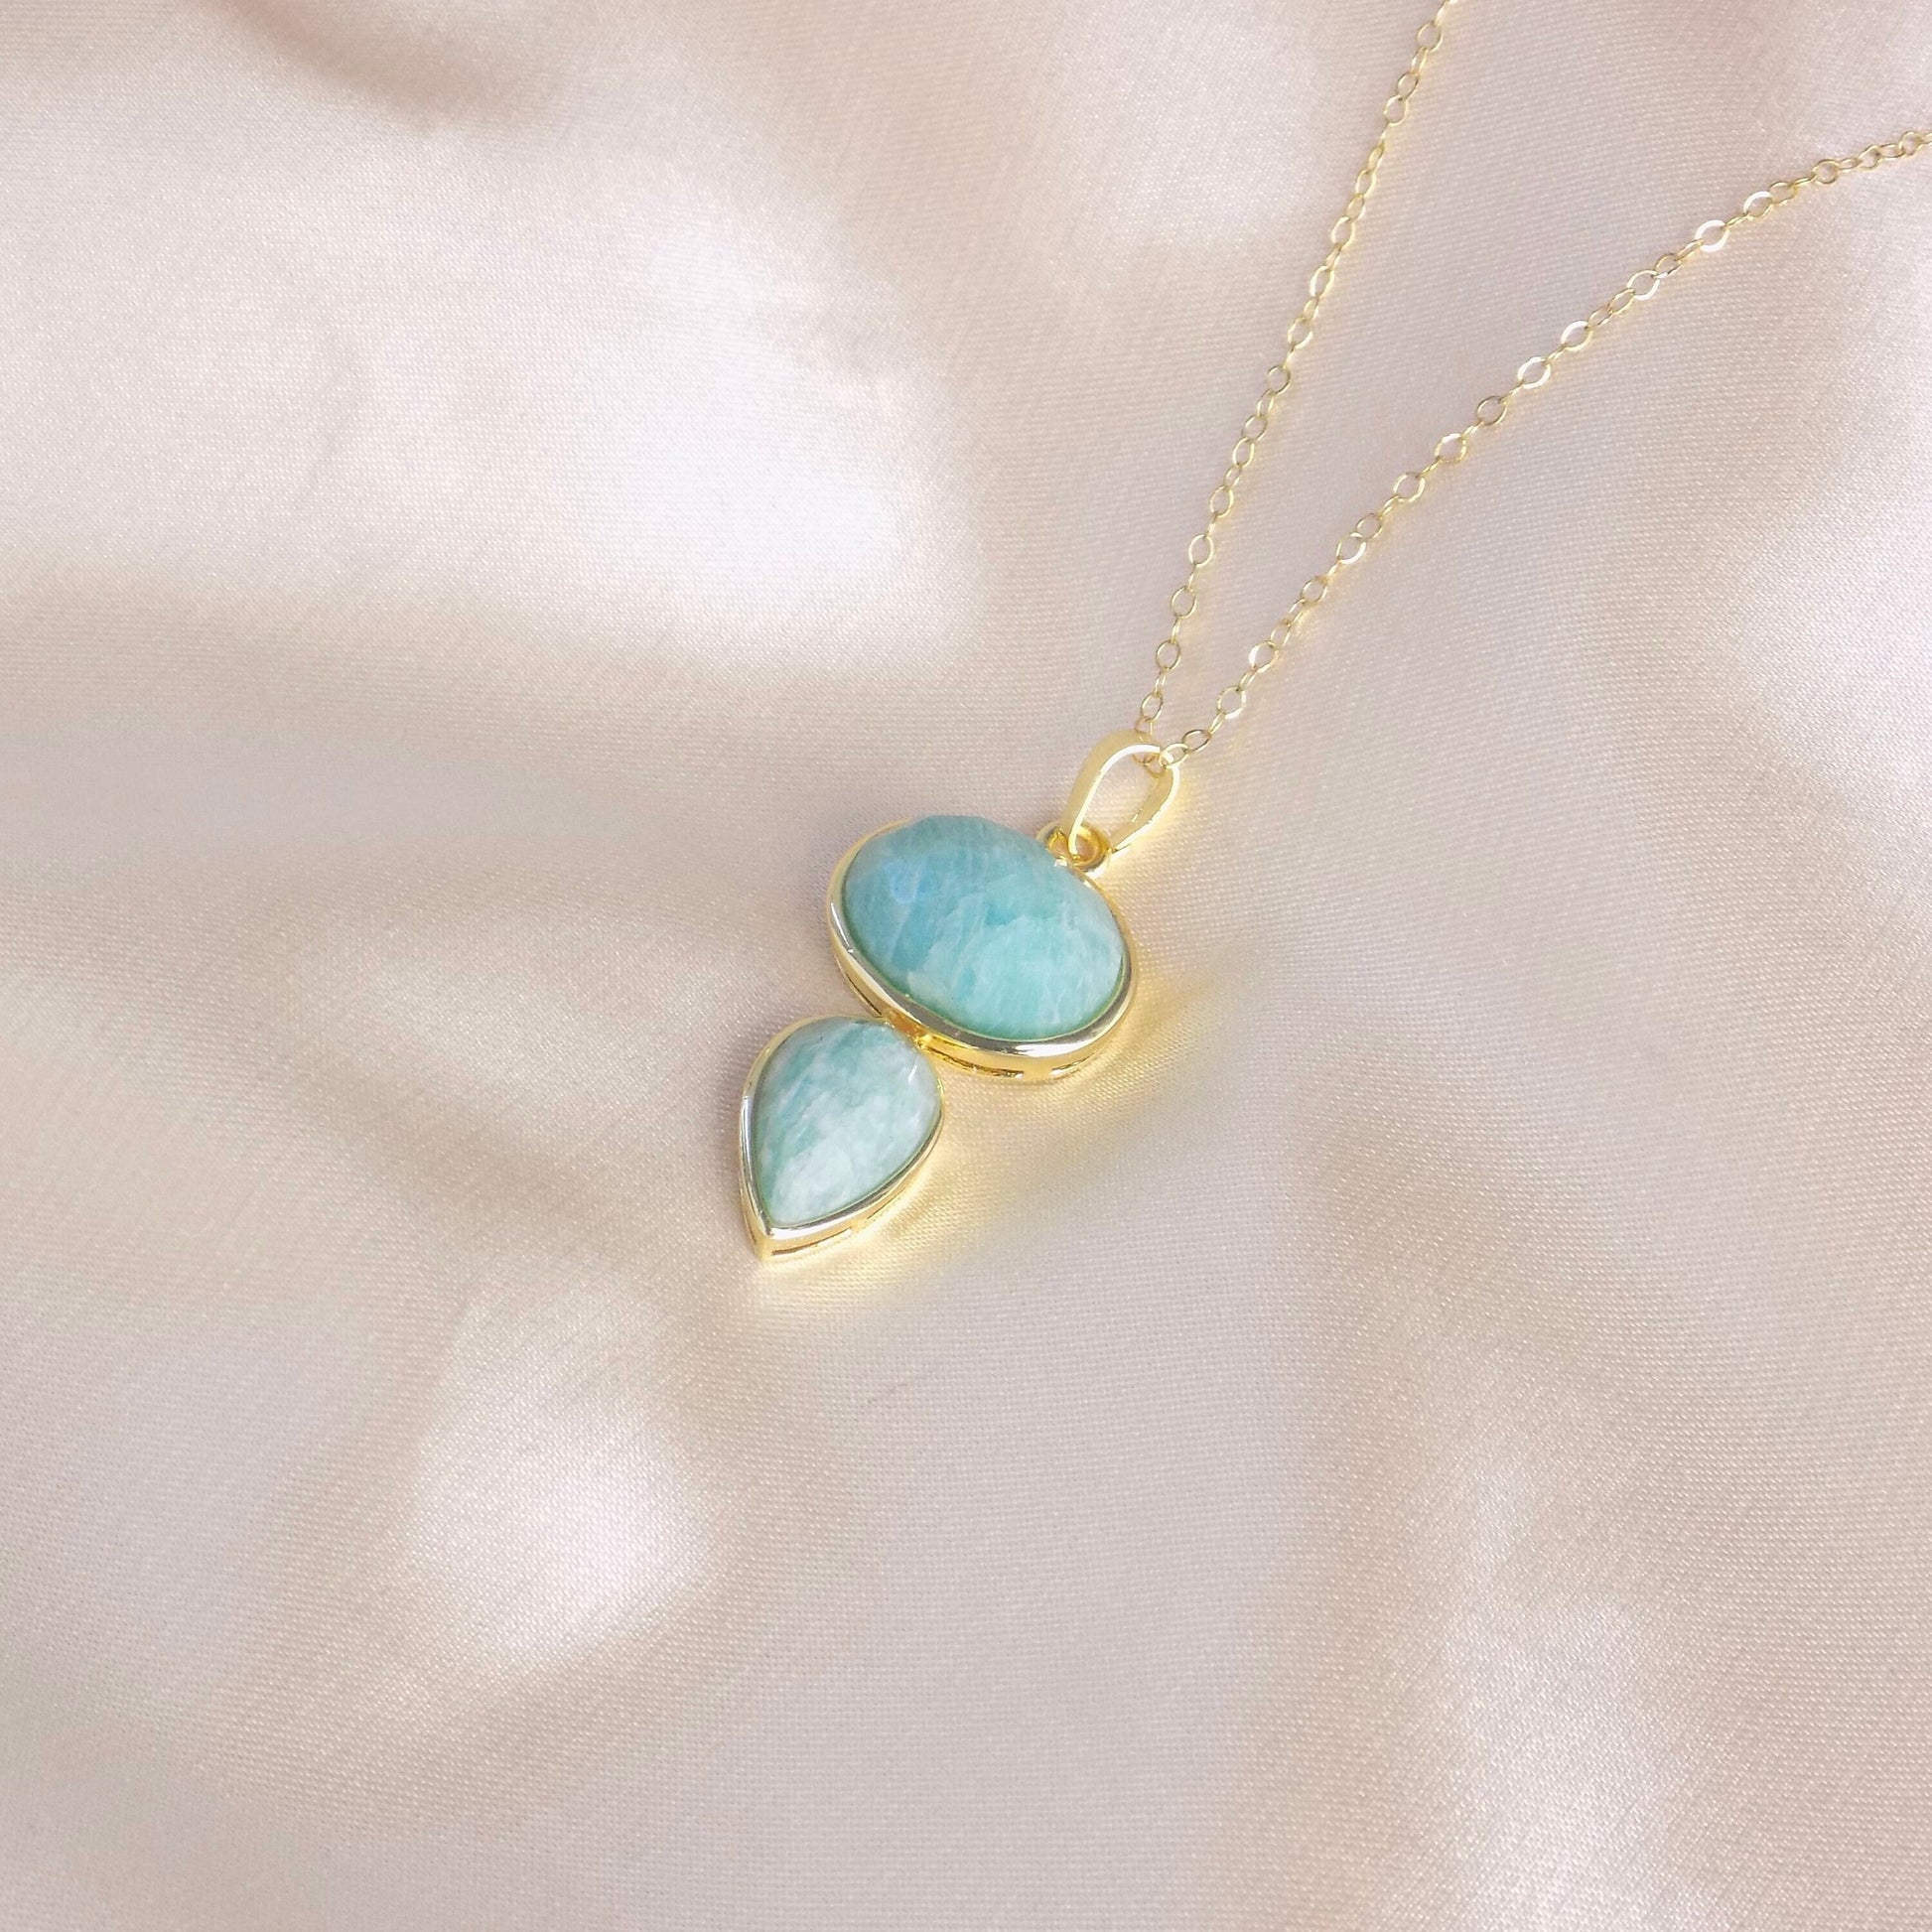 Amazonite Necklace on 14K Gold Filled Chain, Sea Foam Crystal, Christmas Gift For Mom, M7-68